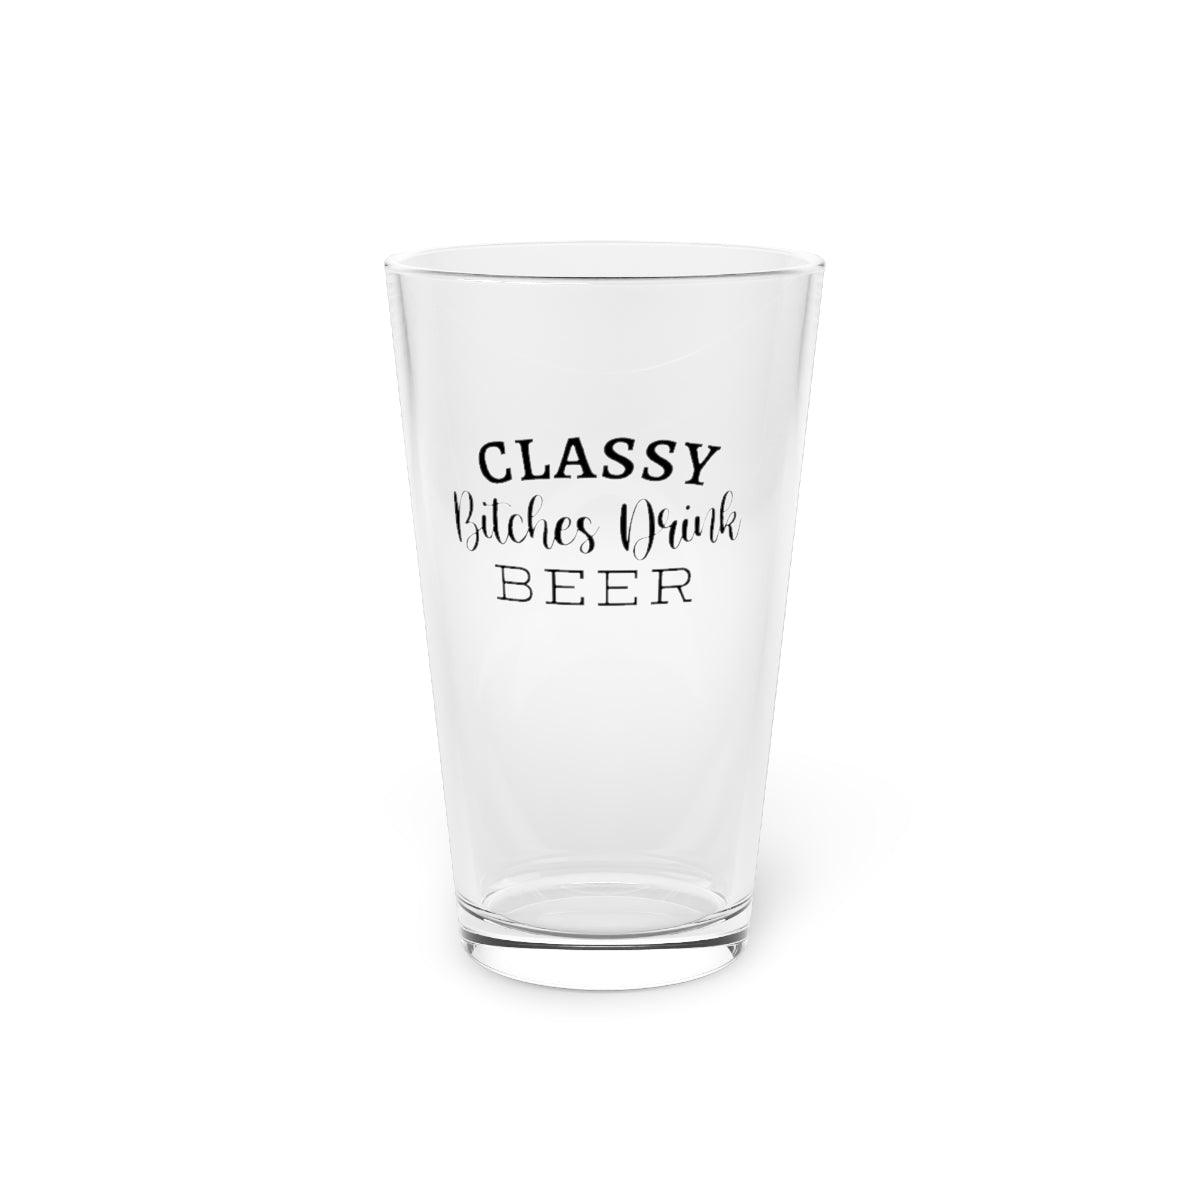 Classy Bitches Drink Beer | Funny Beer Glass